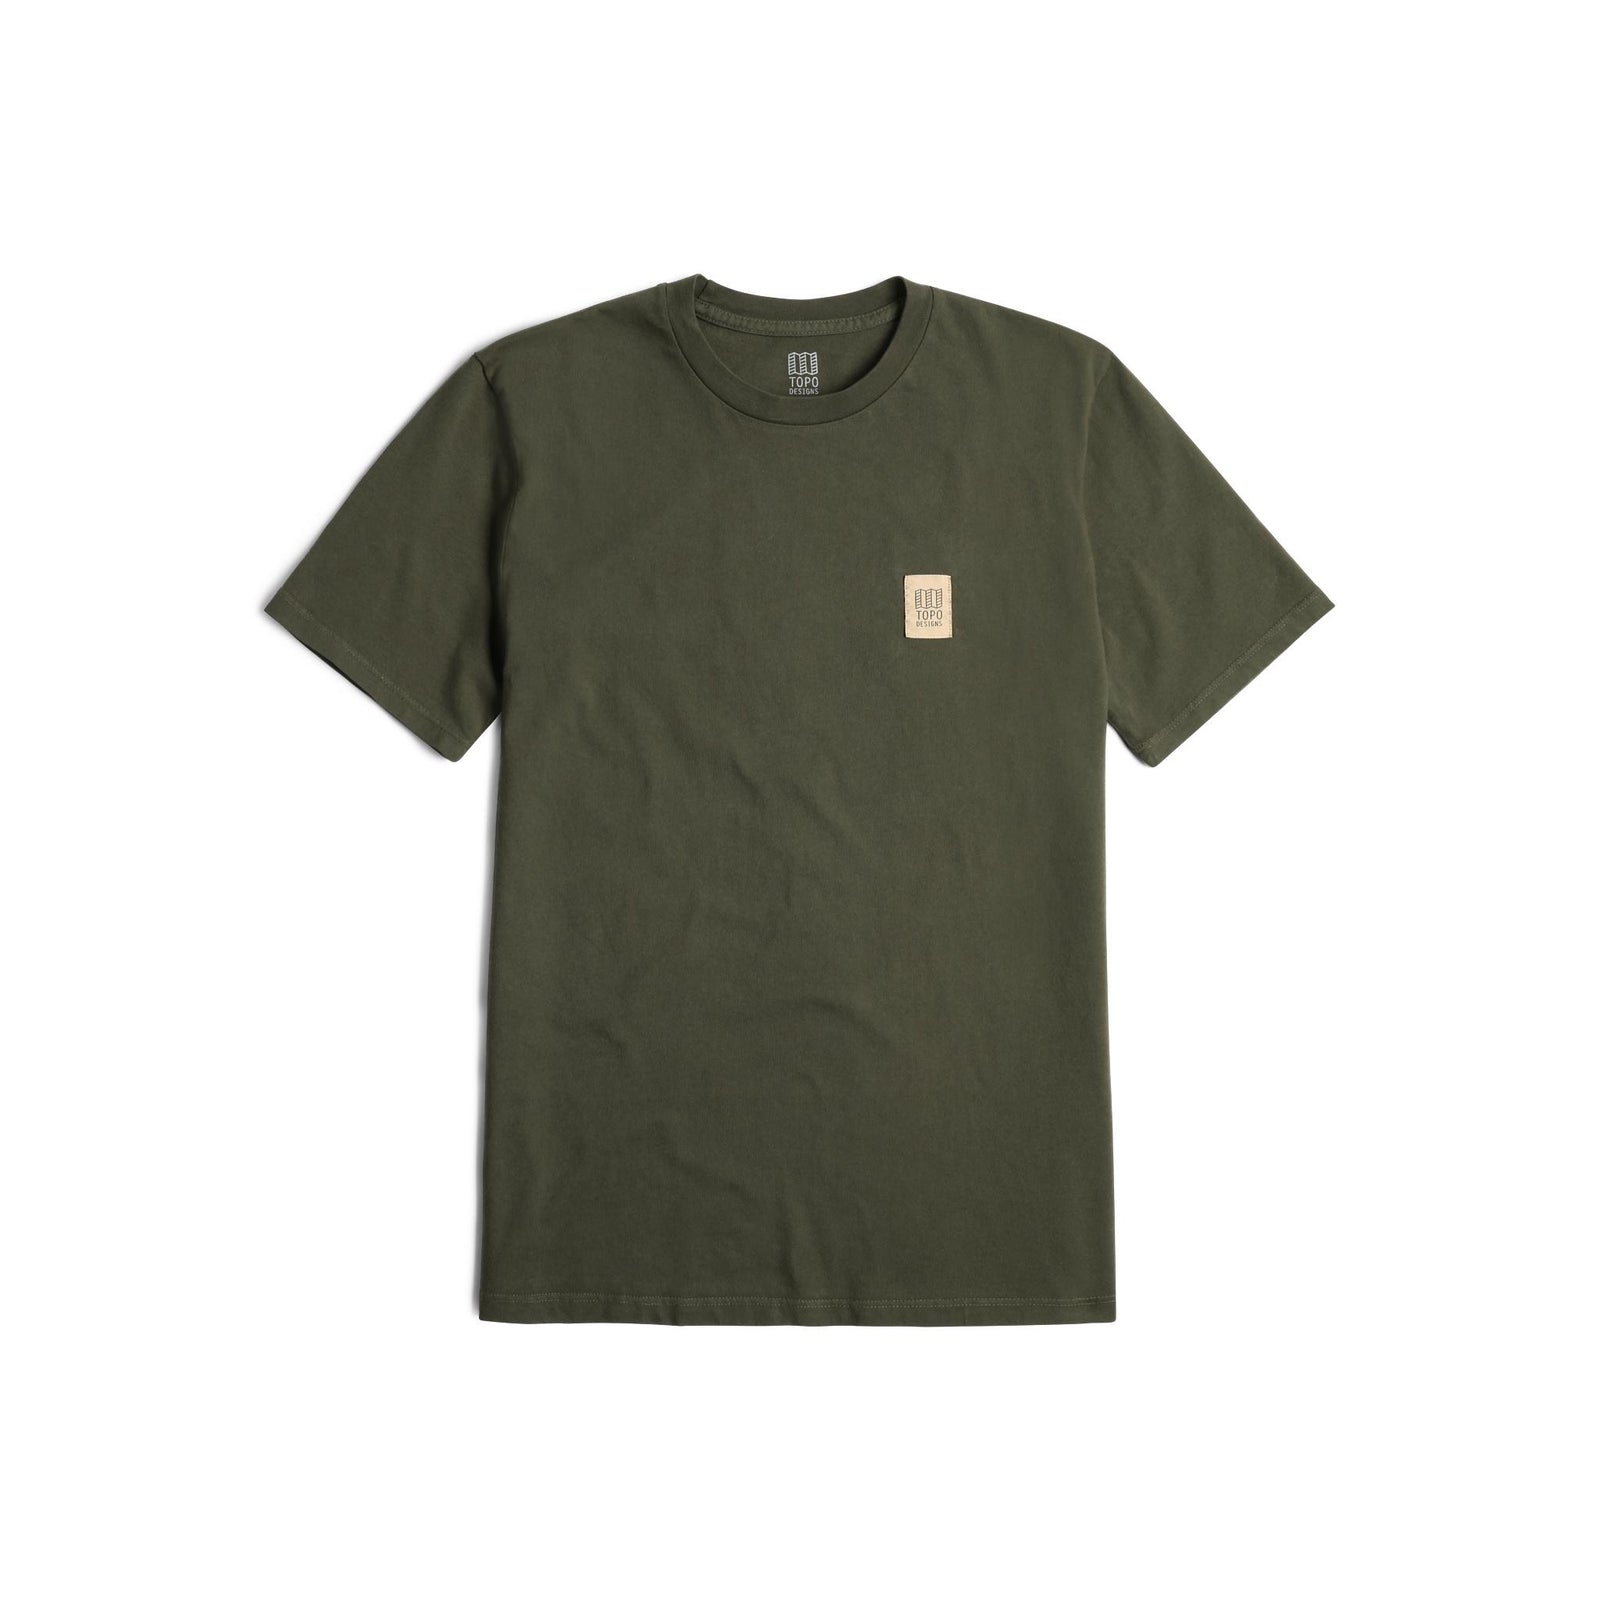 Front View of Topo Designs Label Tee - Men's in "Olive"